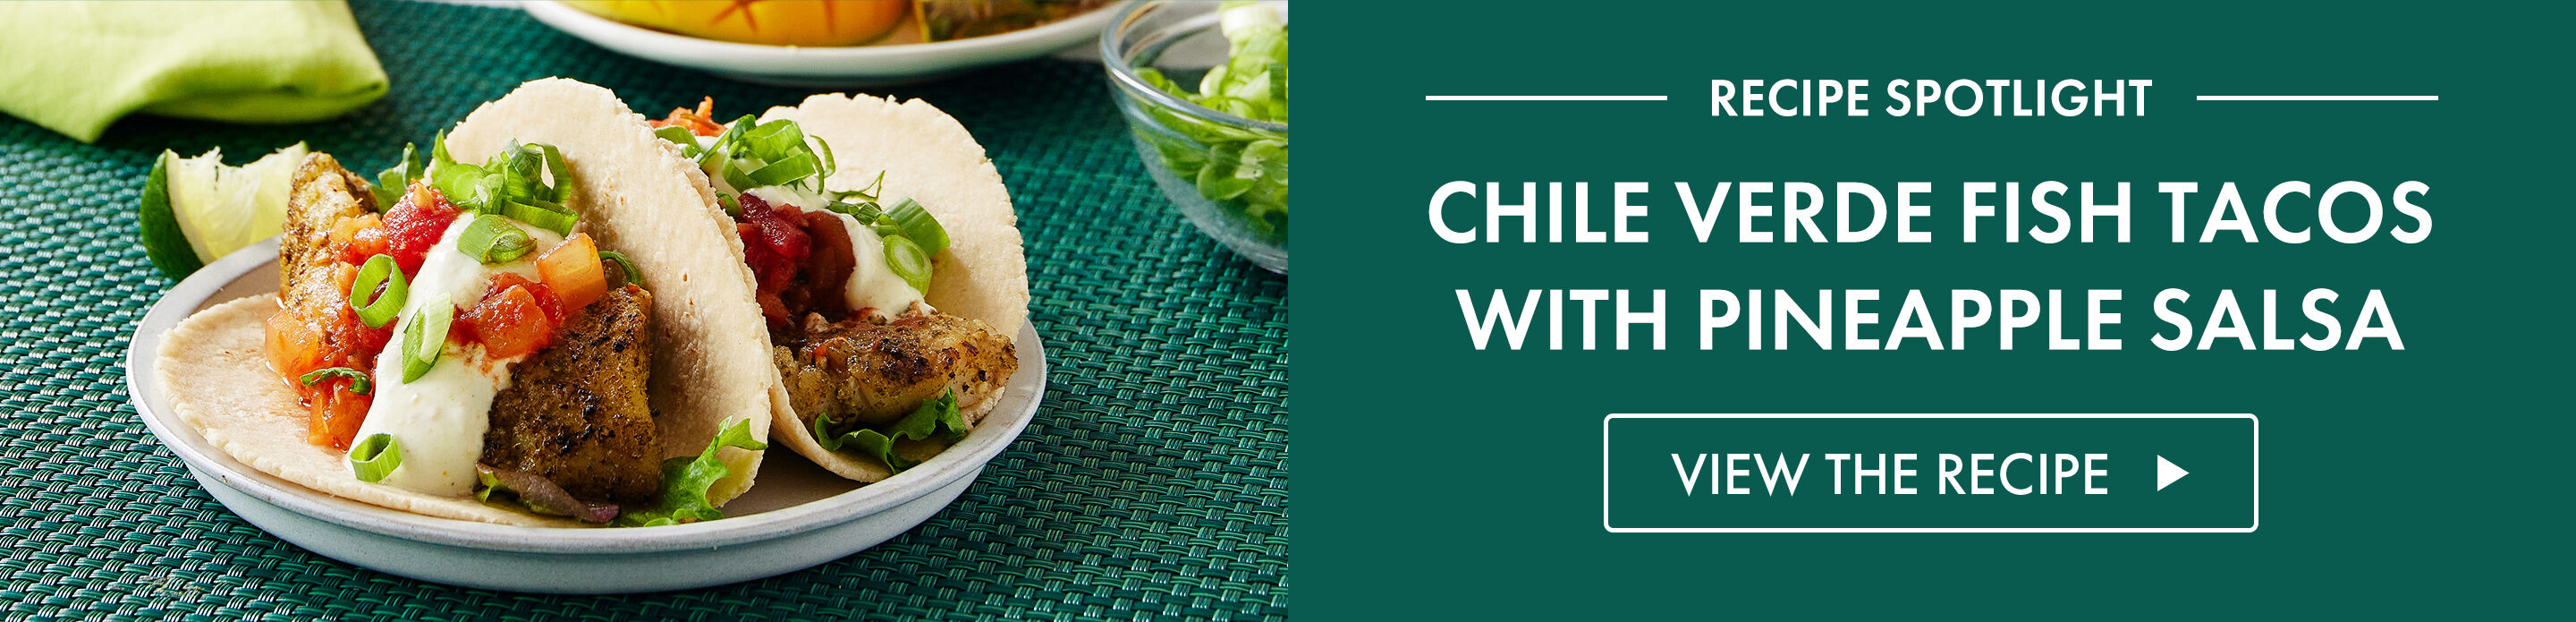 Recipe Spotlight: Chile Verde Fish Tacos with Pineapple Salsa - View The Recipe